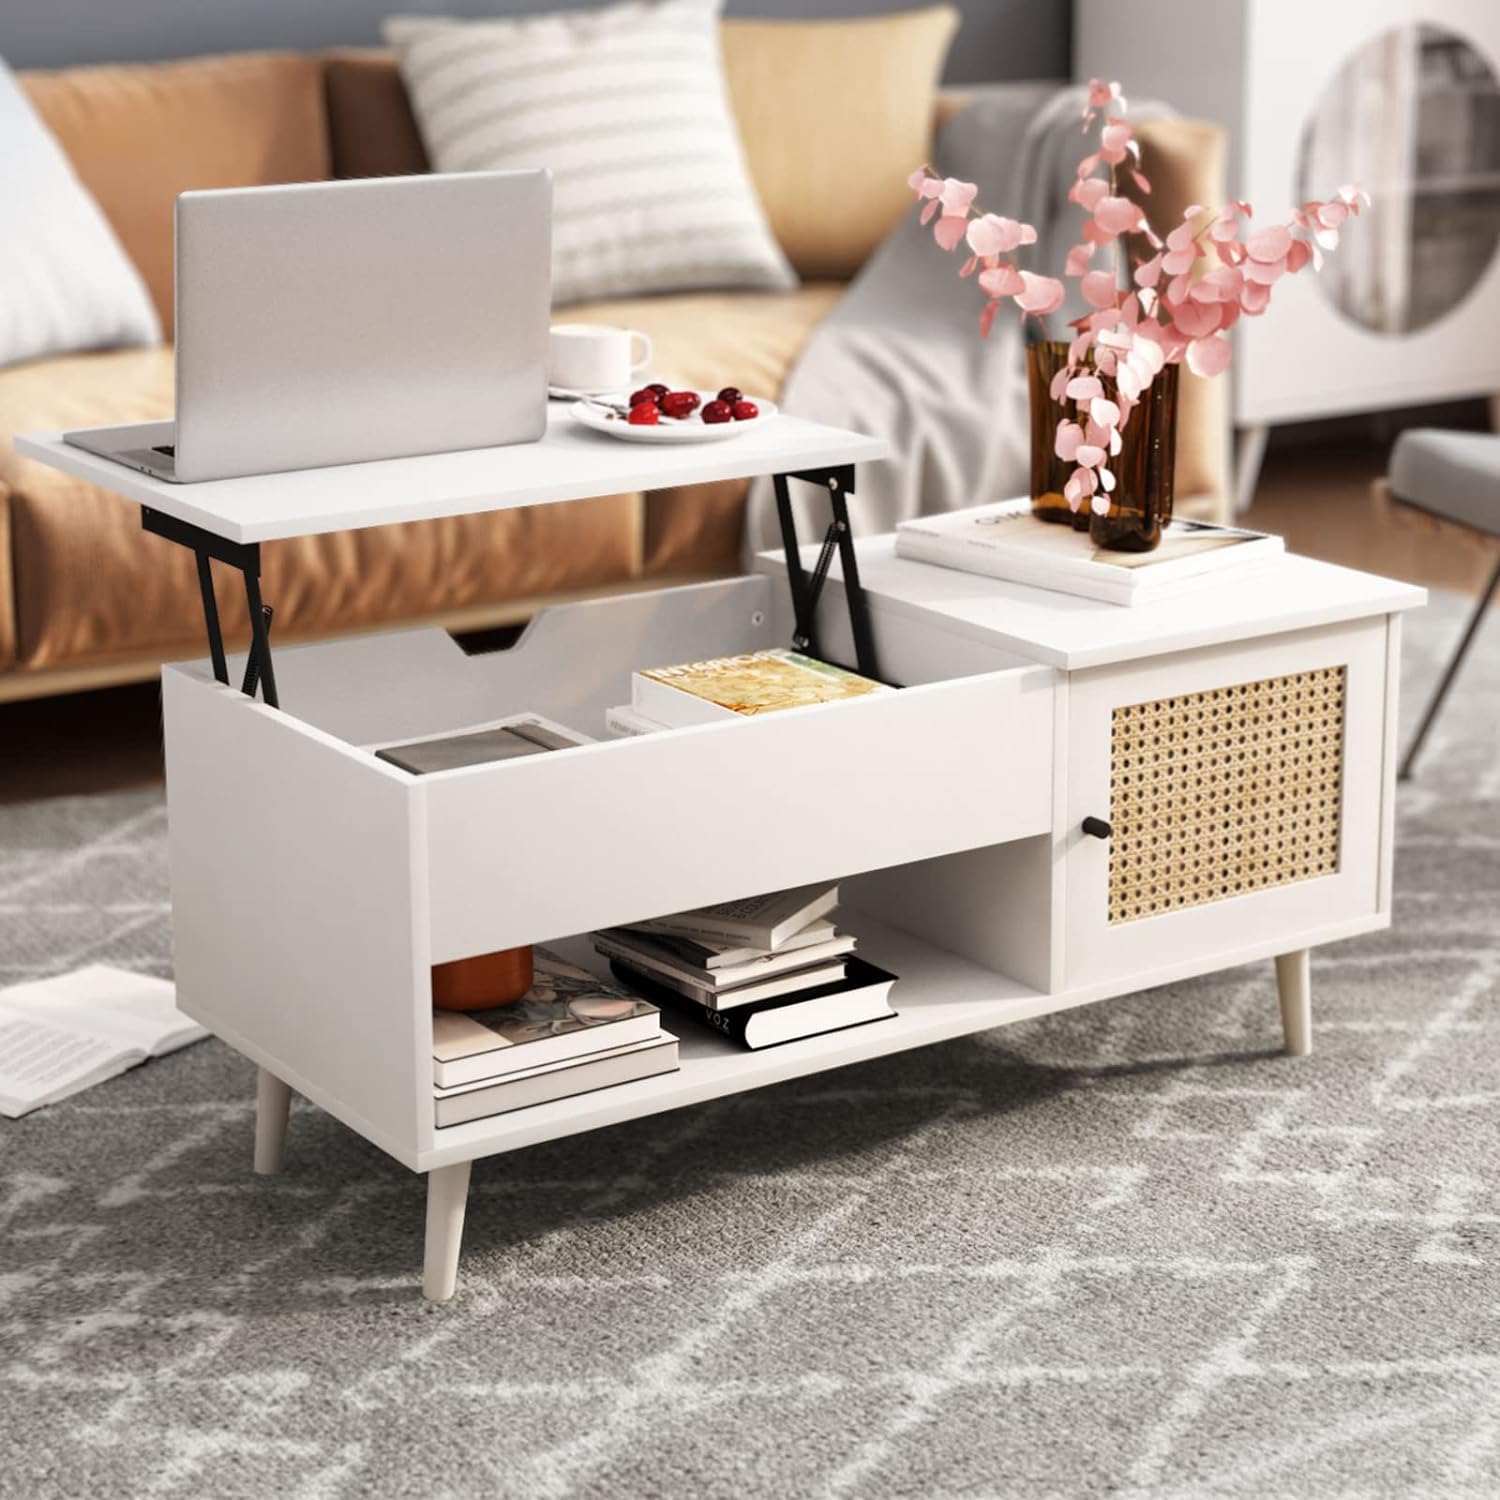 Shelf Lift Top Coffee Table with Hidden Compartment, Big Storage Space and Adjustable Tabletop Dining Table for Home Living Room, Office (White)